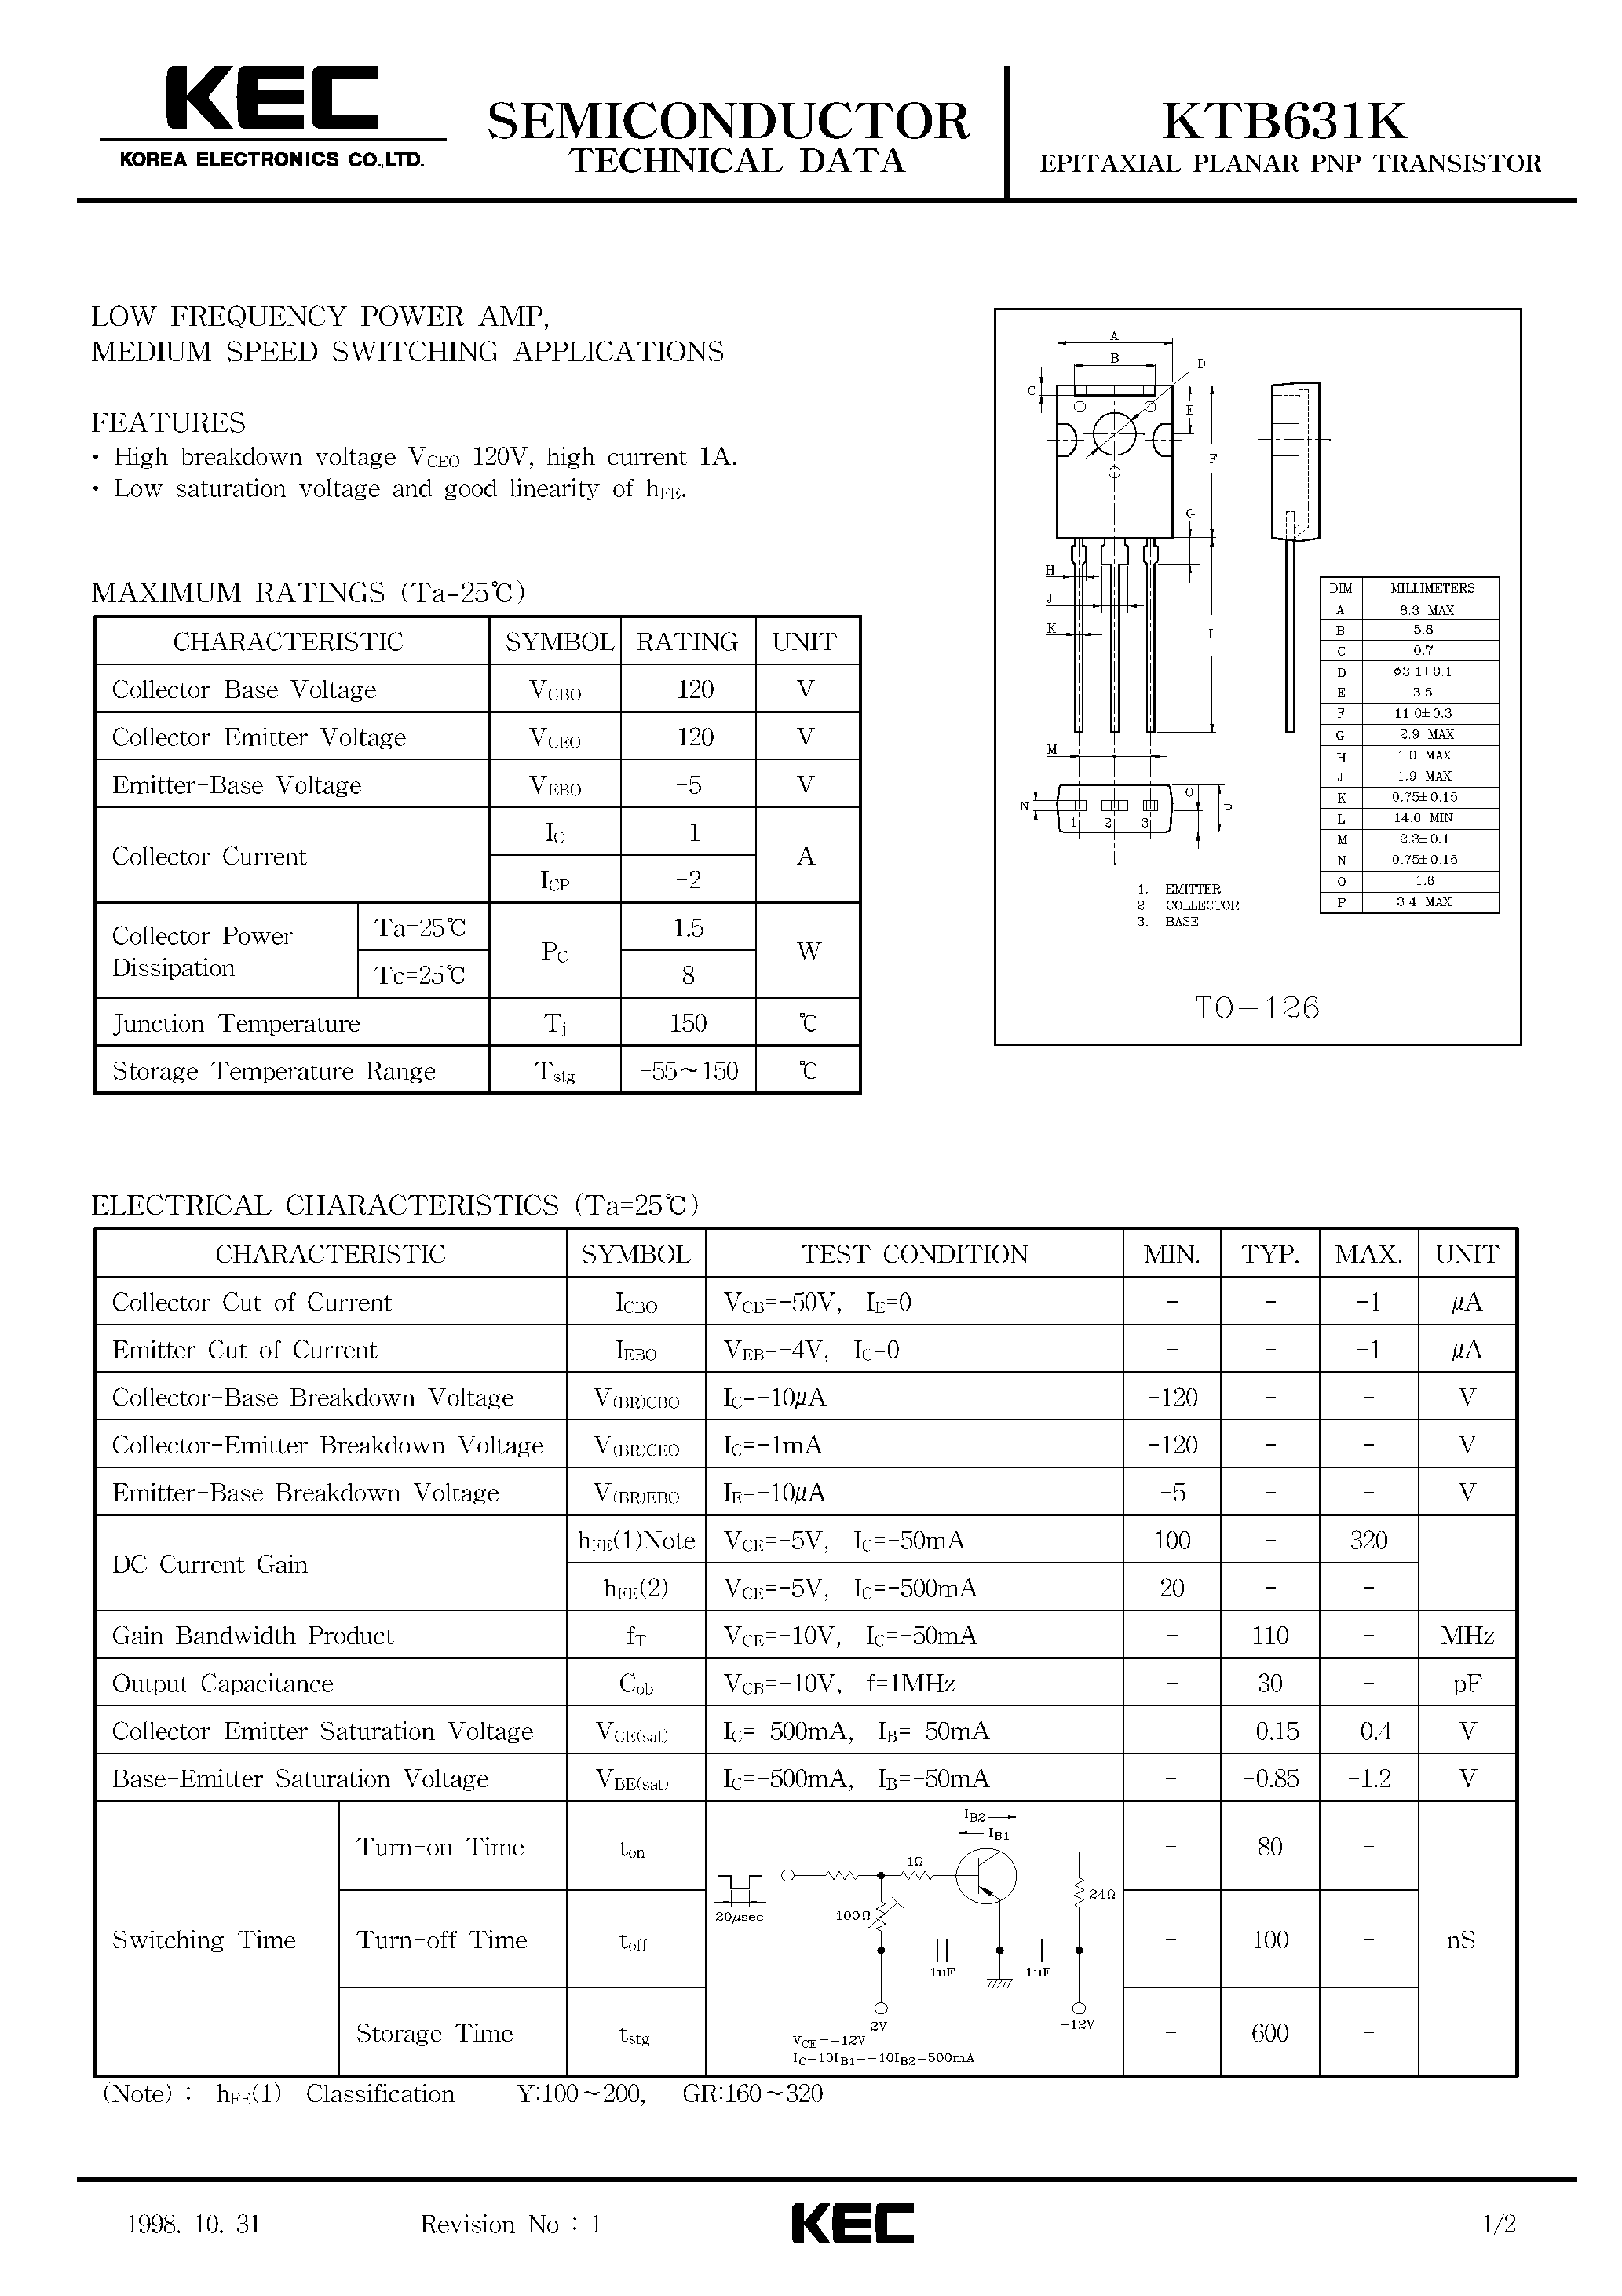 Datasheet KTB631 - EPITAXIAL PLANAR PNP TRANSISTOR (LOW FREQUENCY POWER AMP/ MEDIUM SPEED SWITCHING) page 1